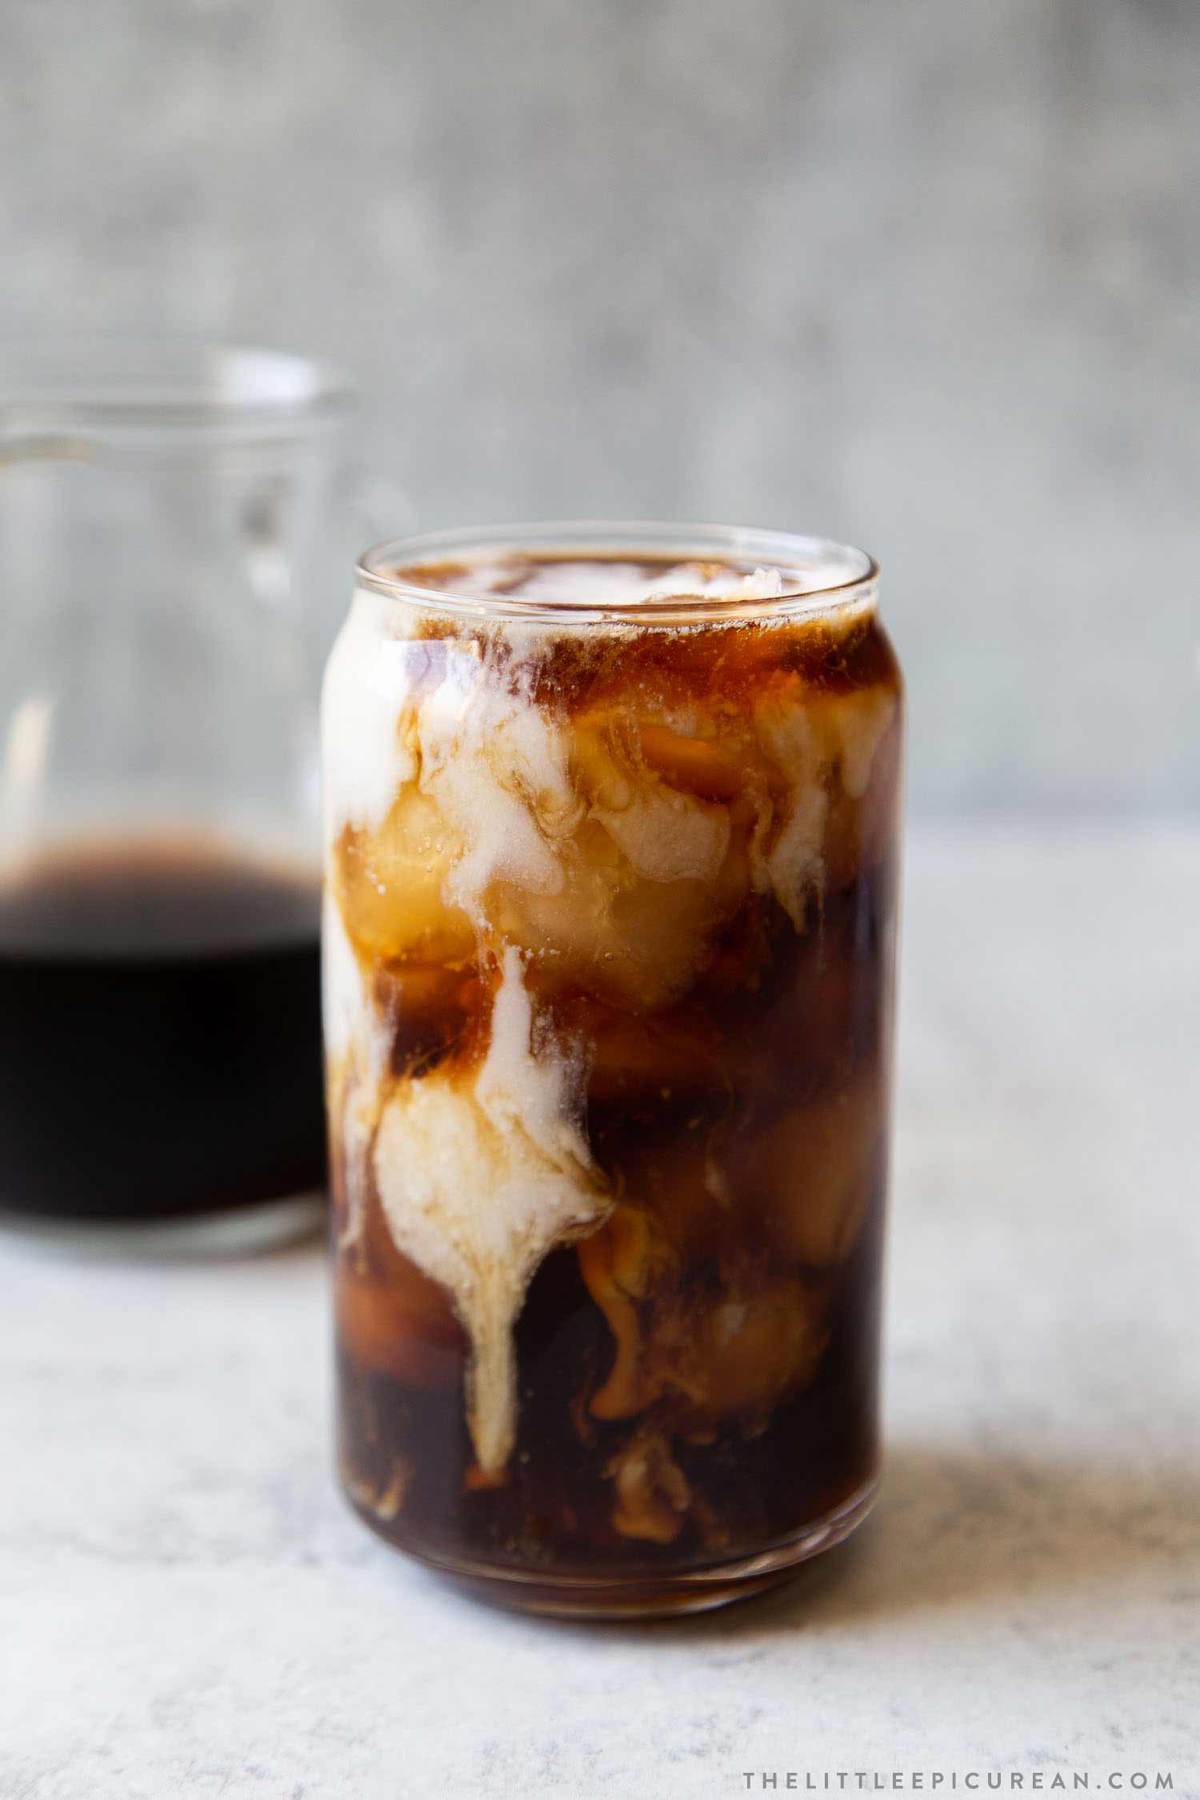 How To Cold Brew Coffee - Fresh April Flours